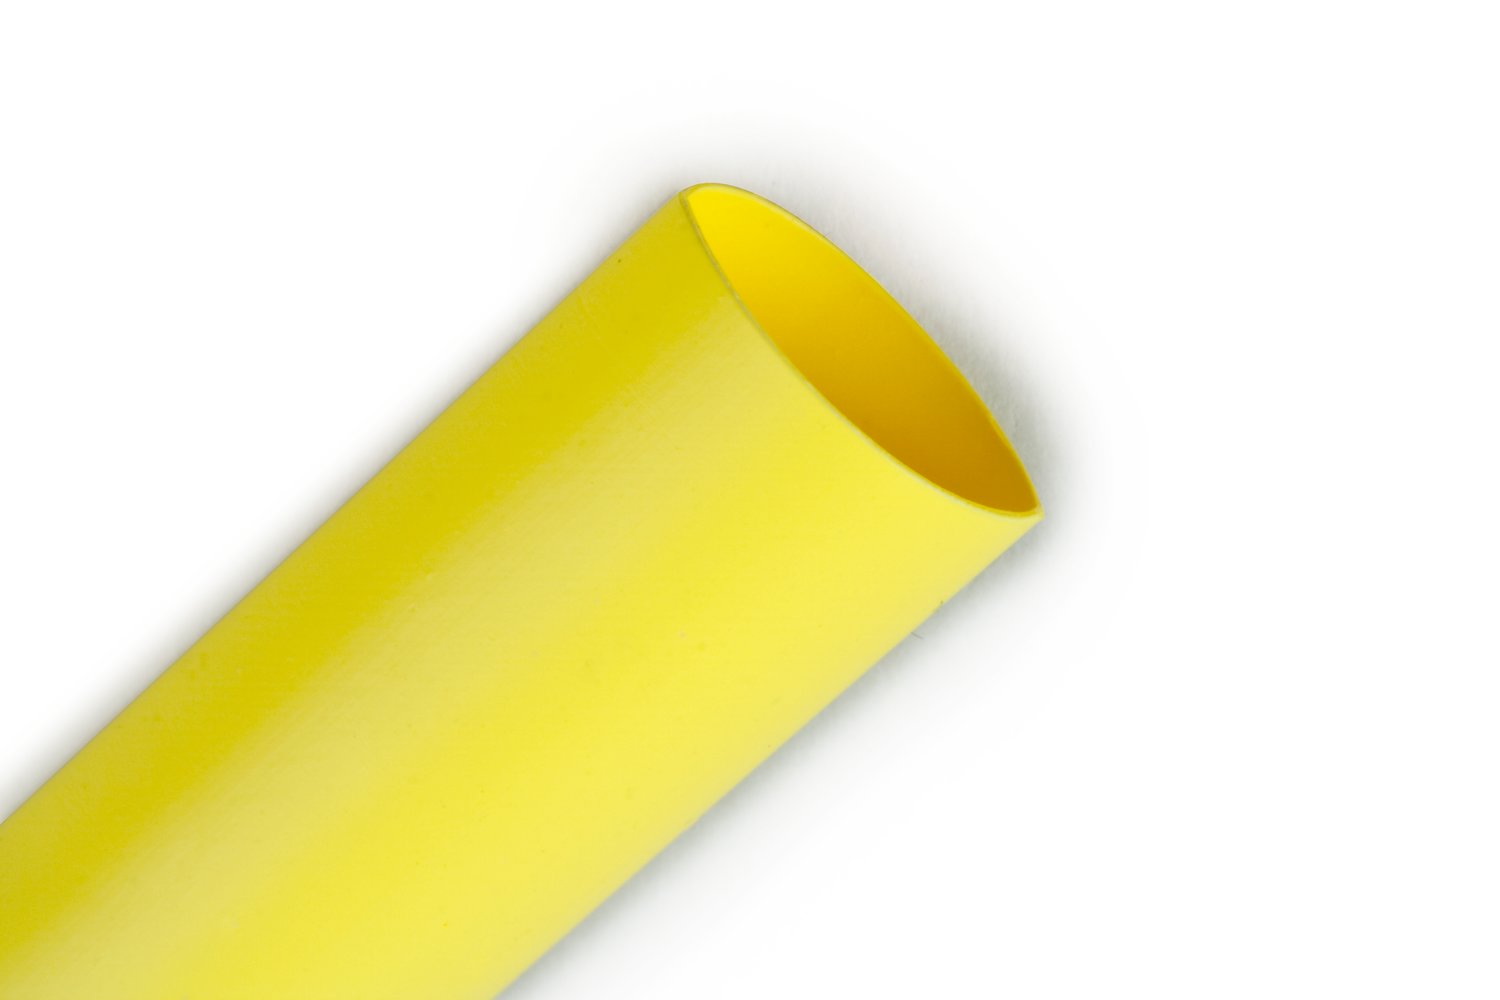 7100027245 - 3M Heat Shrink Thin-Wall Tubing FP-301-3-Yellow-50', 50 ft Length, 1
Roll/Case